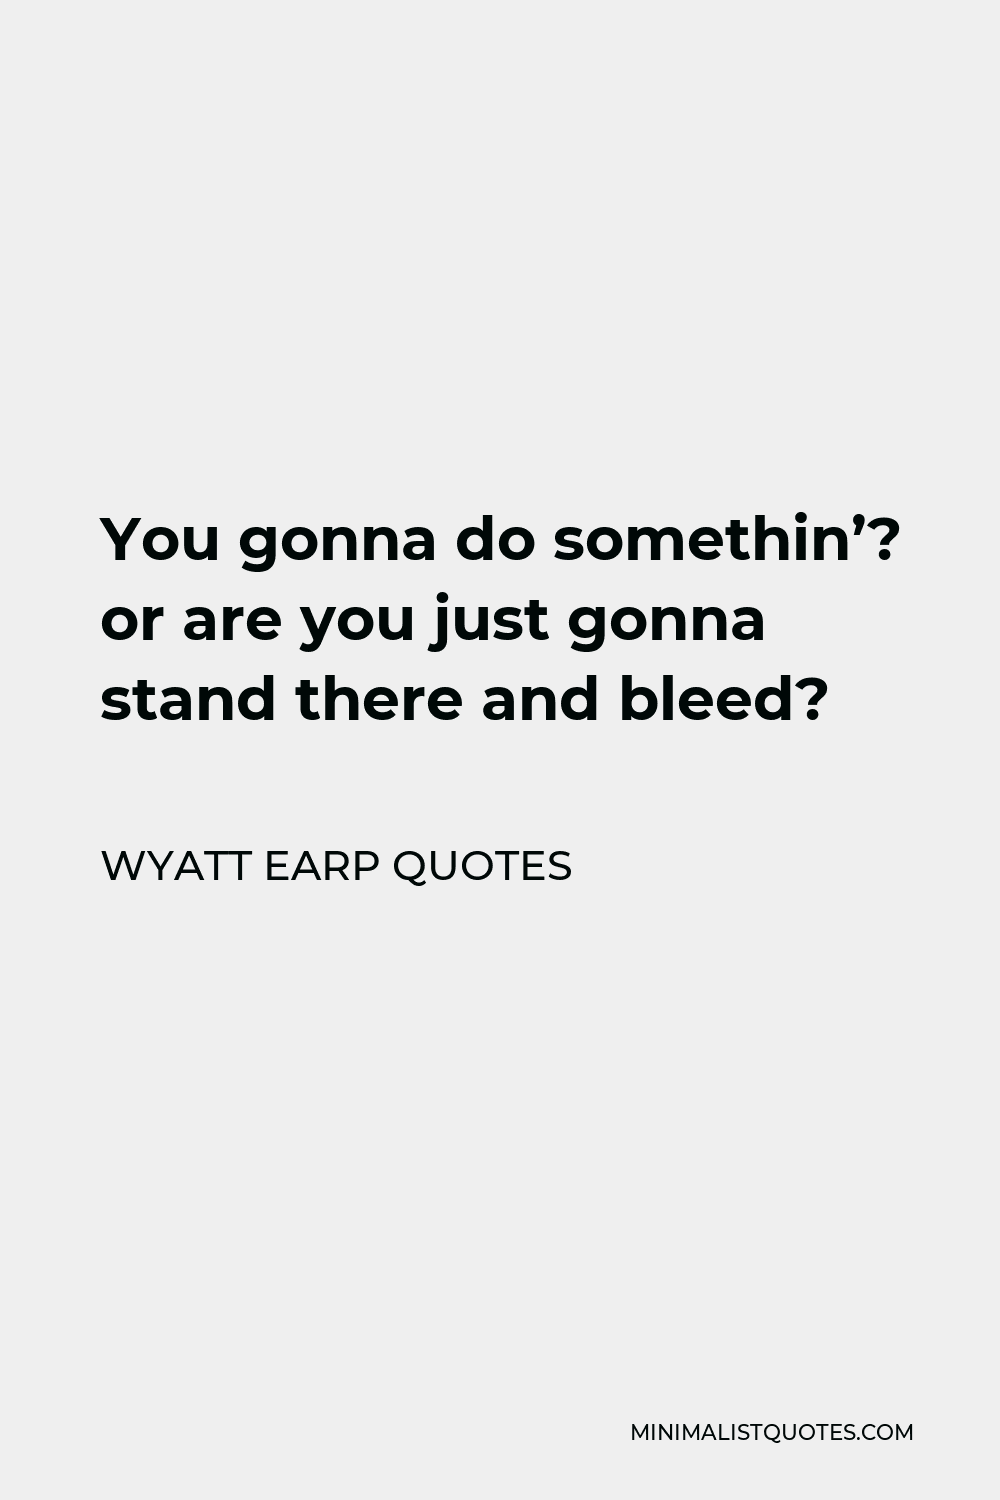 Wyatt Earp Quotes Quote - You gonna do somethin’? or are you just gonna stand there and bleed?